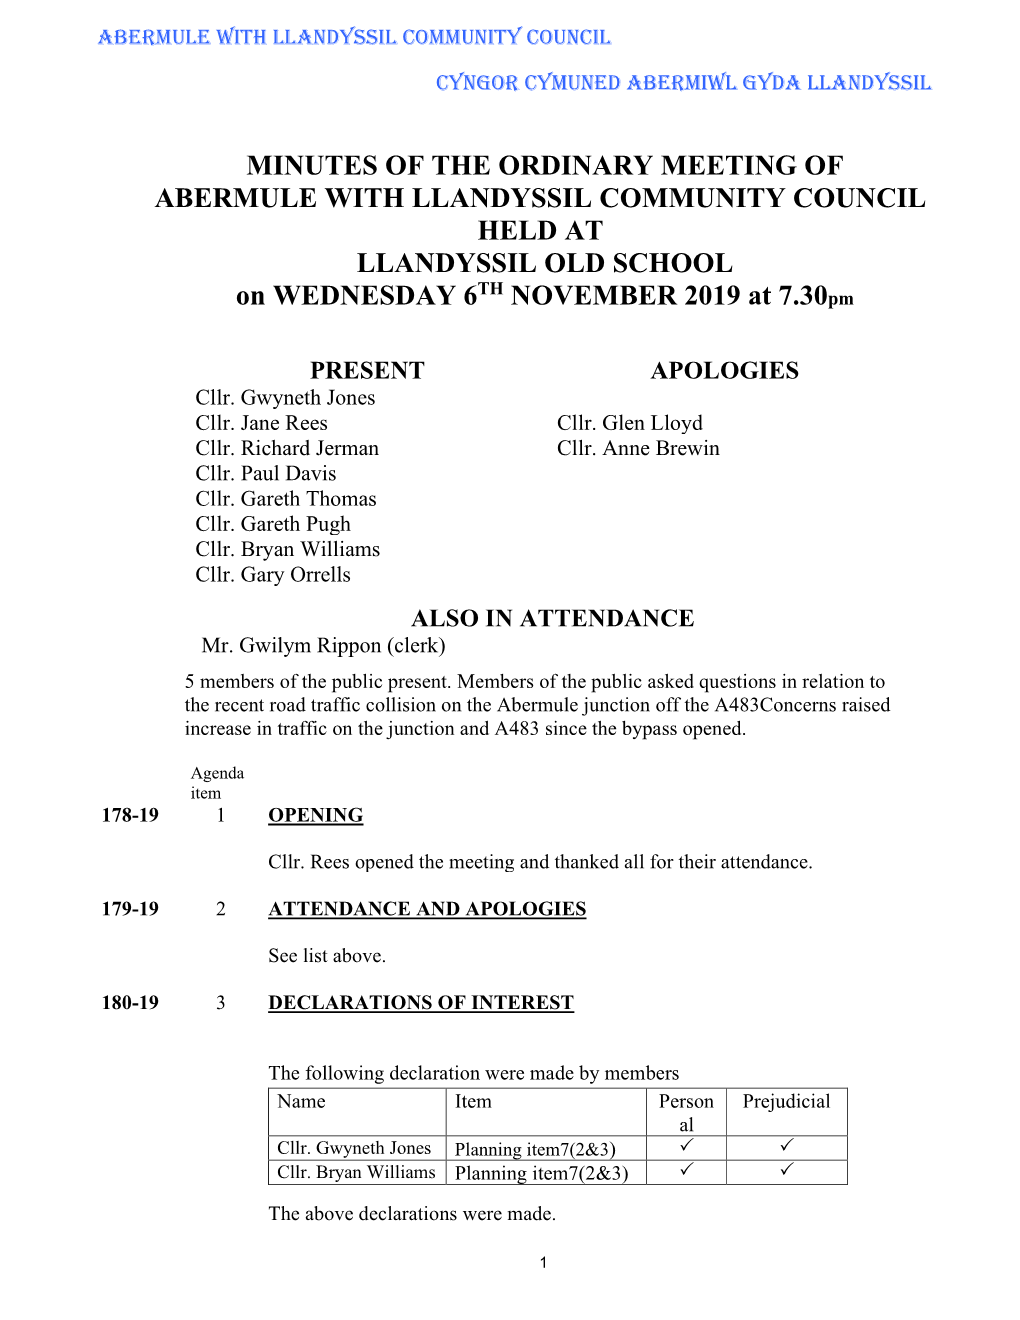 MINUTES of the ORDINARY MEETING of ABERMULE with LLANDYSSIL COMMUNITY COUNCIL HELD at LLANDYSSIL OLD SCHOOL TH on WEDNESDAY 6 NOVEMBER 2019 at 7.30Pm